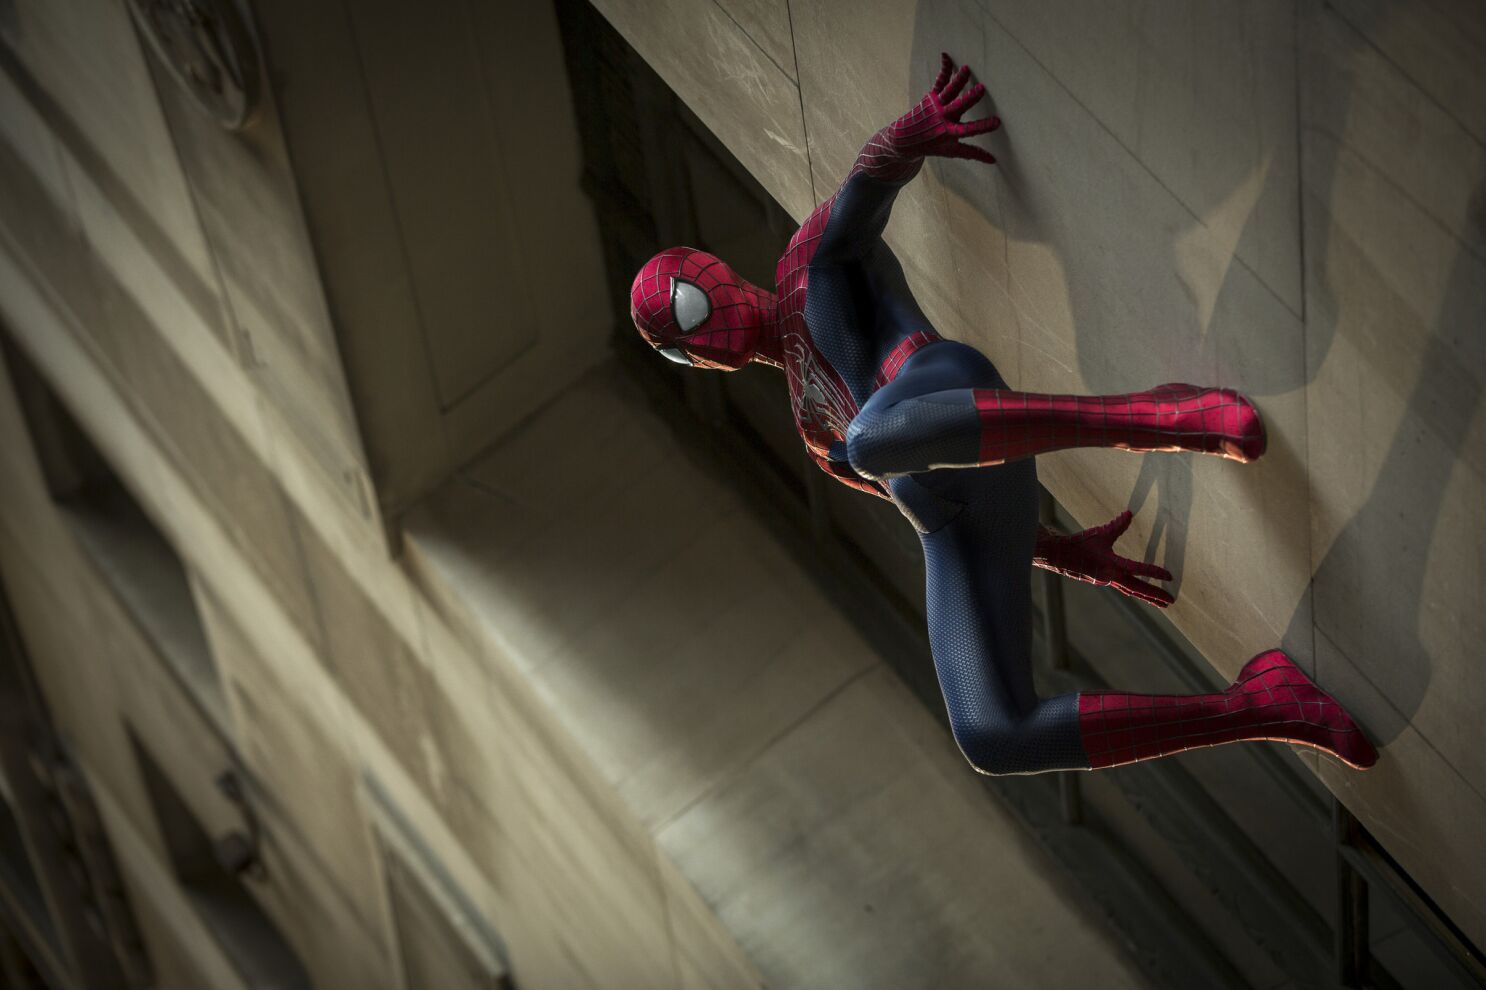 Amazing Spider-Man 2': Sparks fly amid tangled plot, early reviews say -  Los Angeles Times